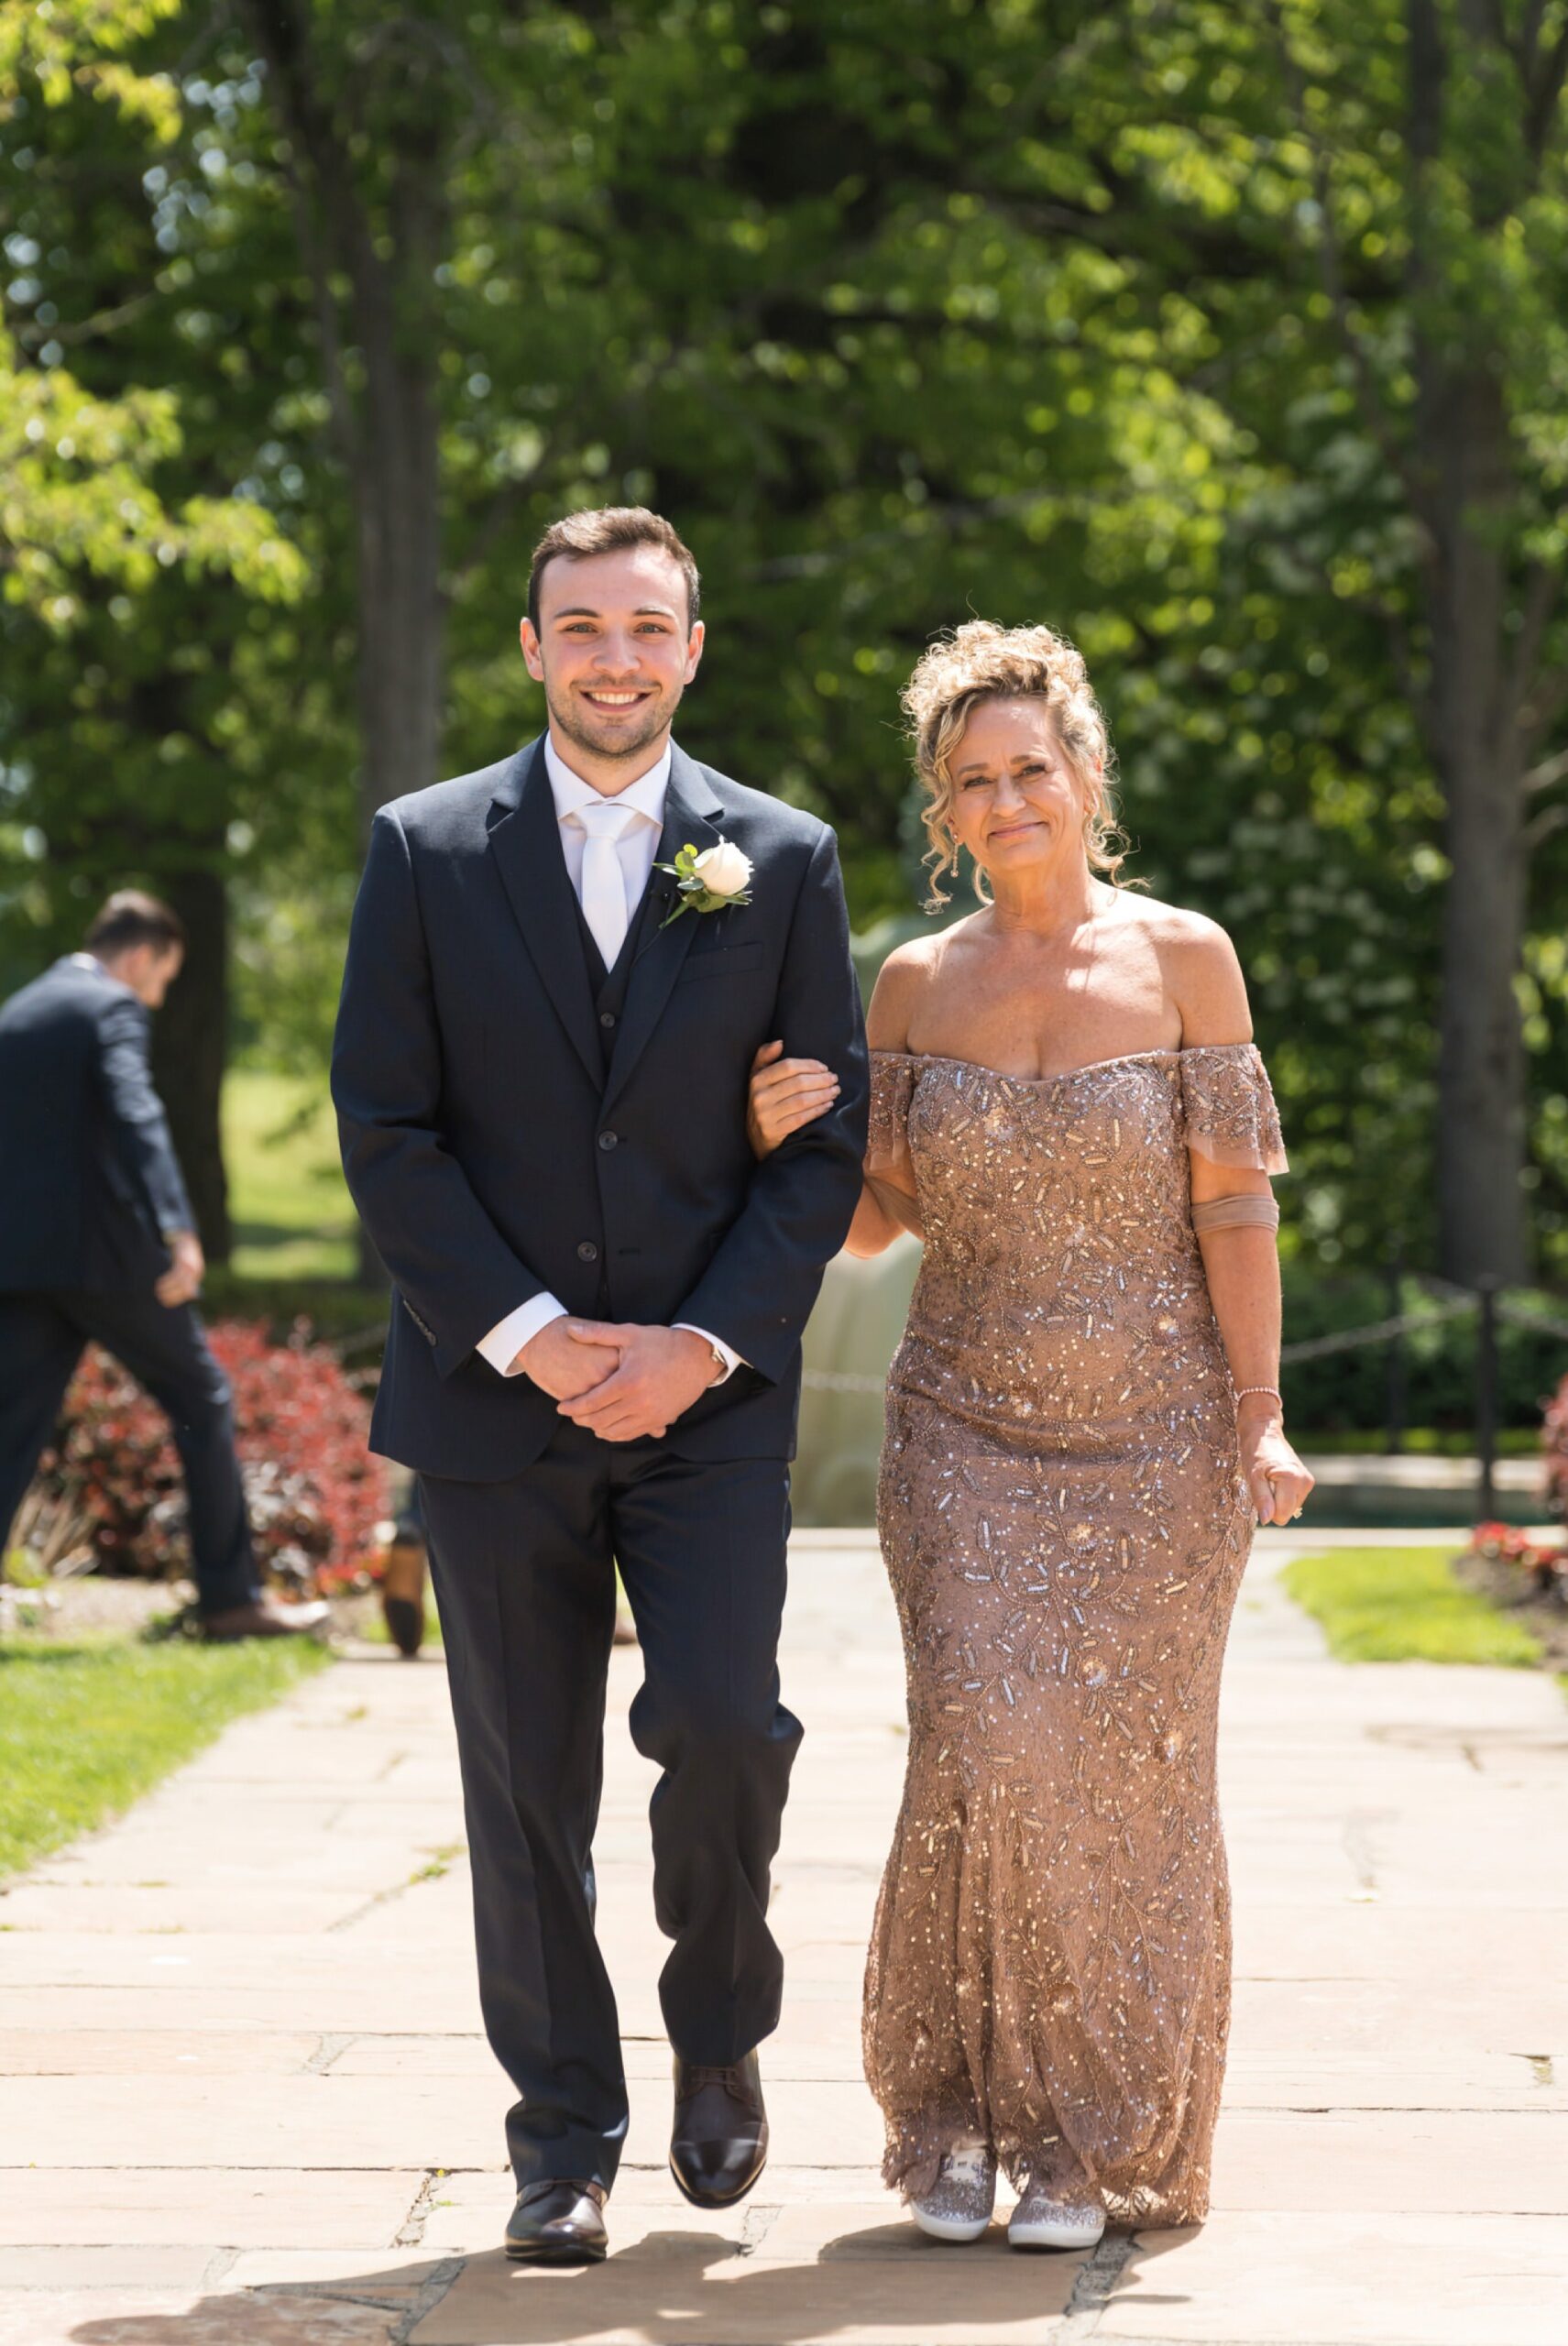 The groom and his mom walk down the aisle at his wedding at Meadowbrook Hall.